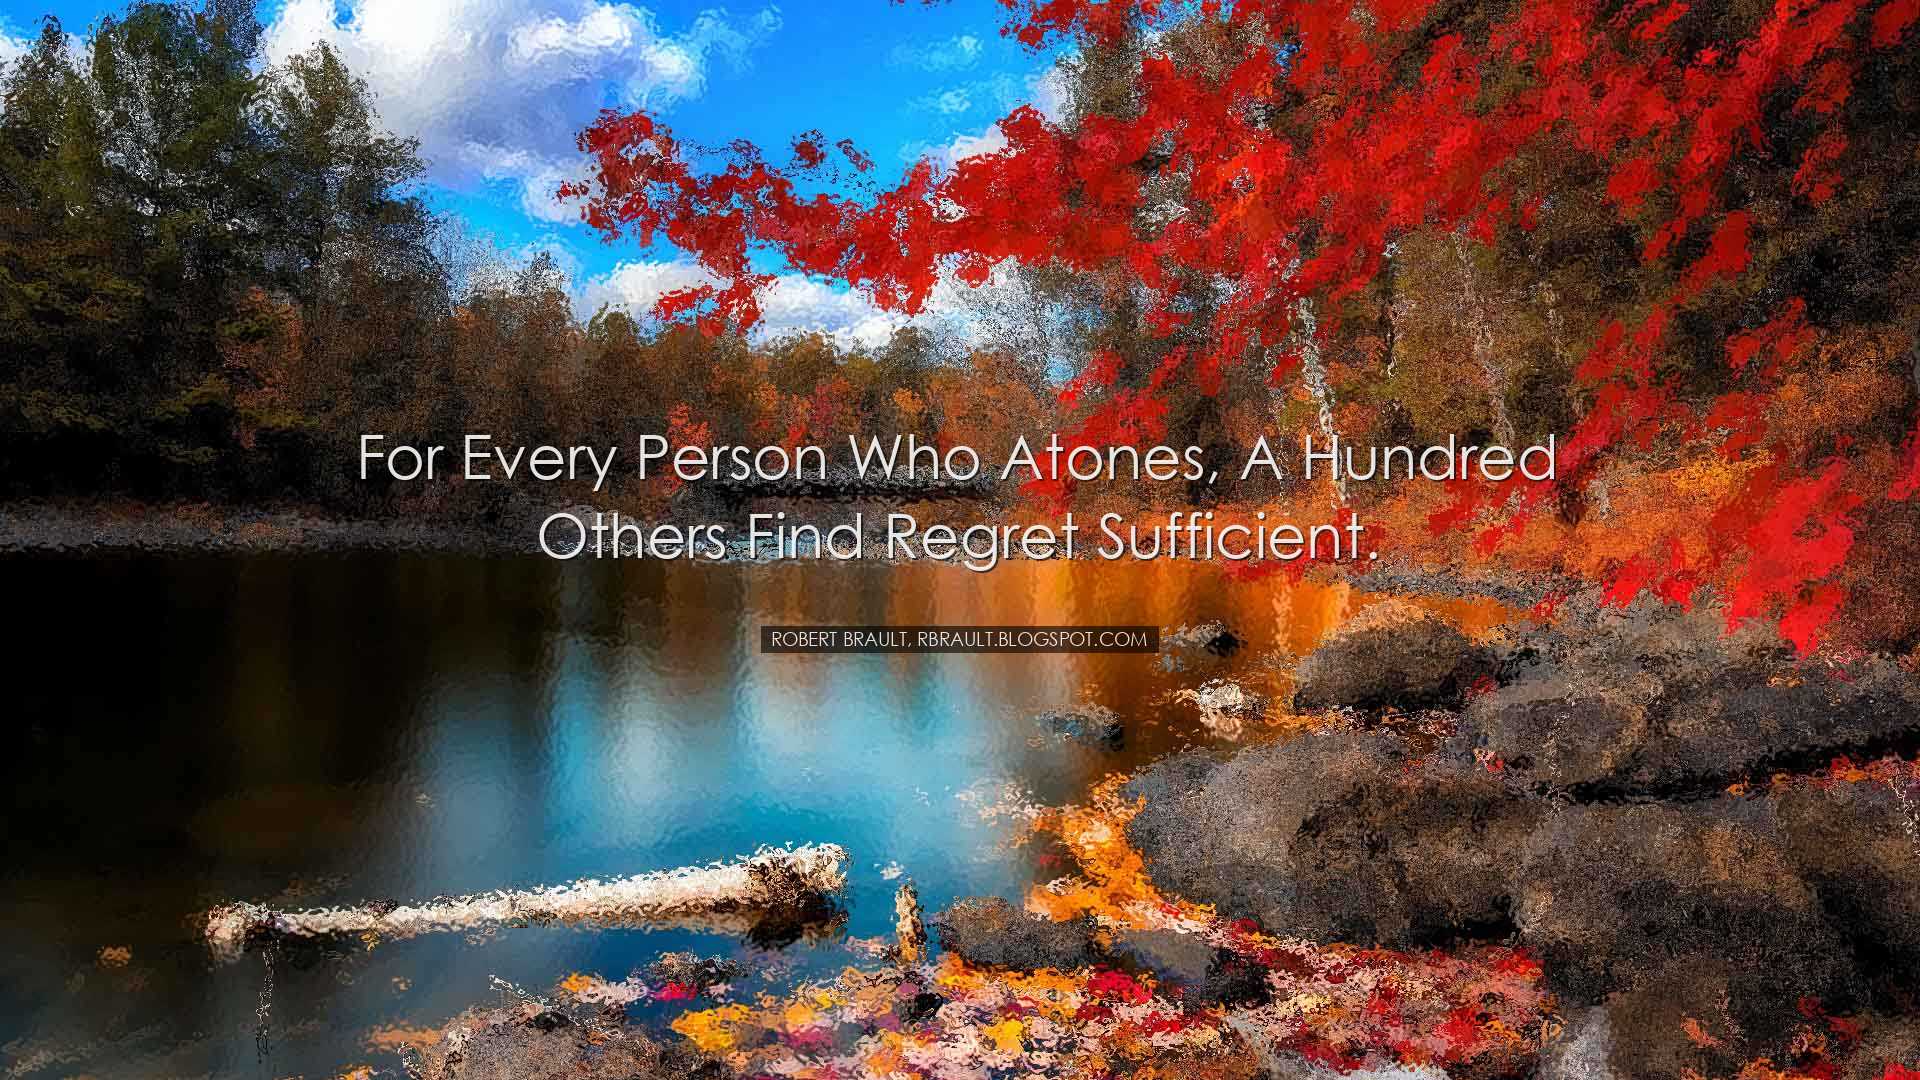 For every person who atones, a hundred others find regret sufficie